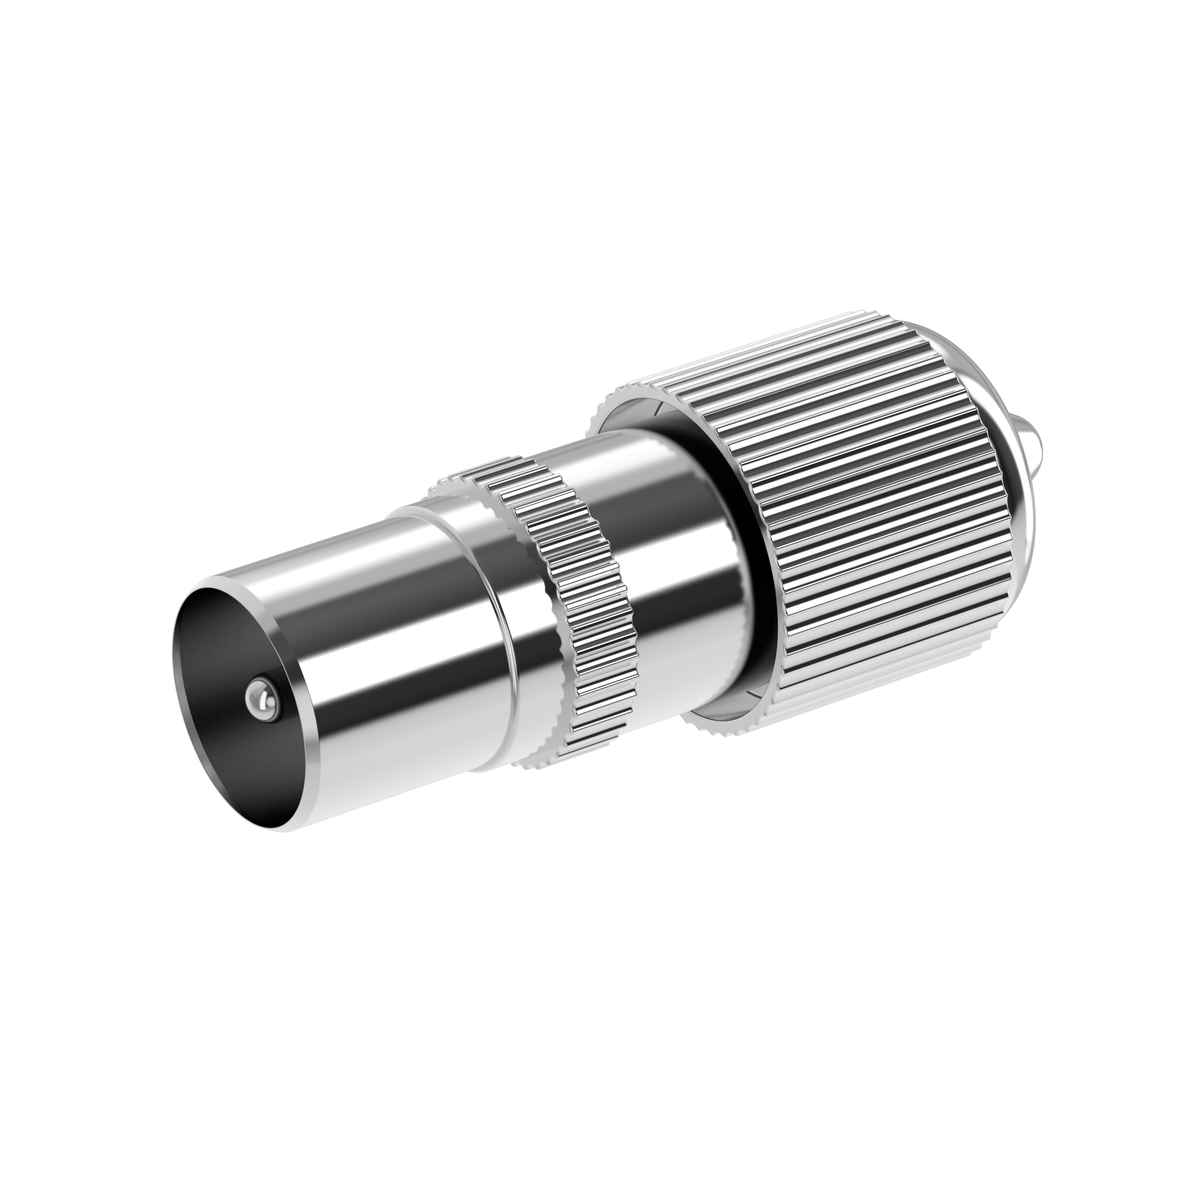 Sinox 7mm Coax  Metal Antenna Connector | 52504 from Sinox - DID Electrical